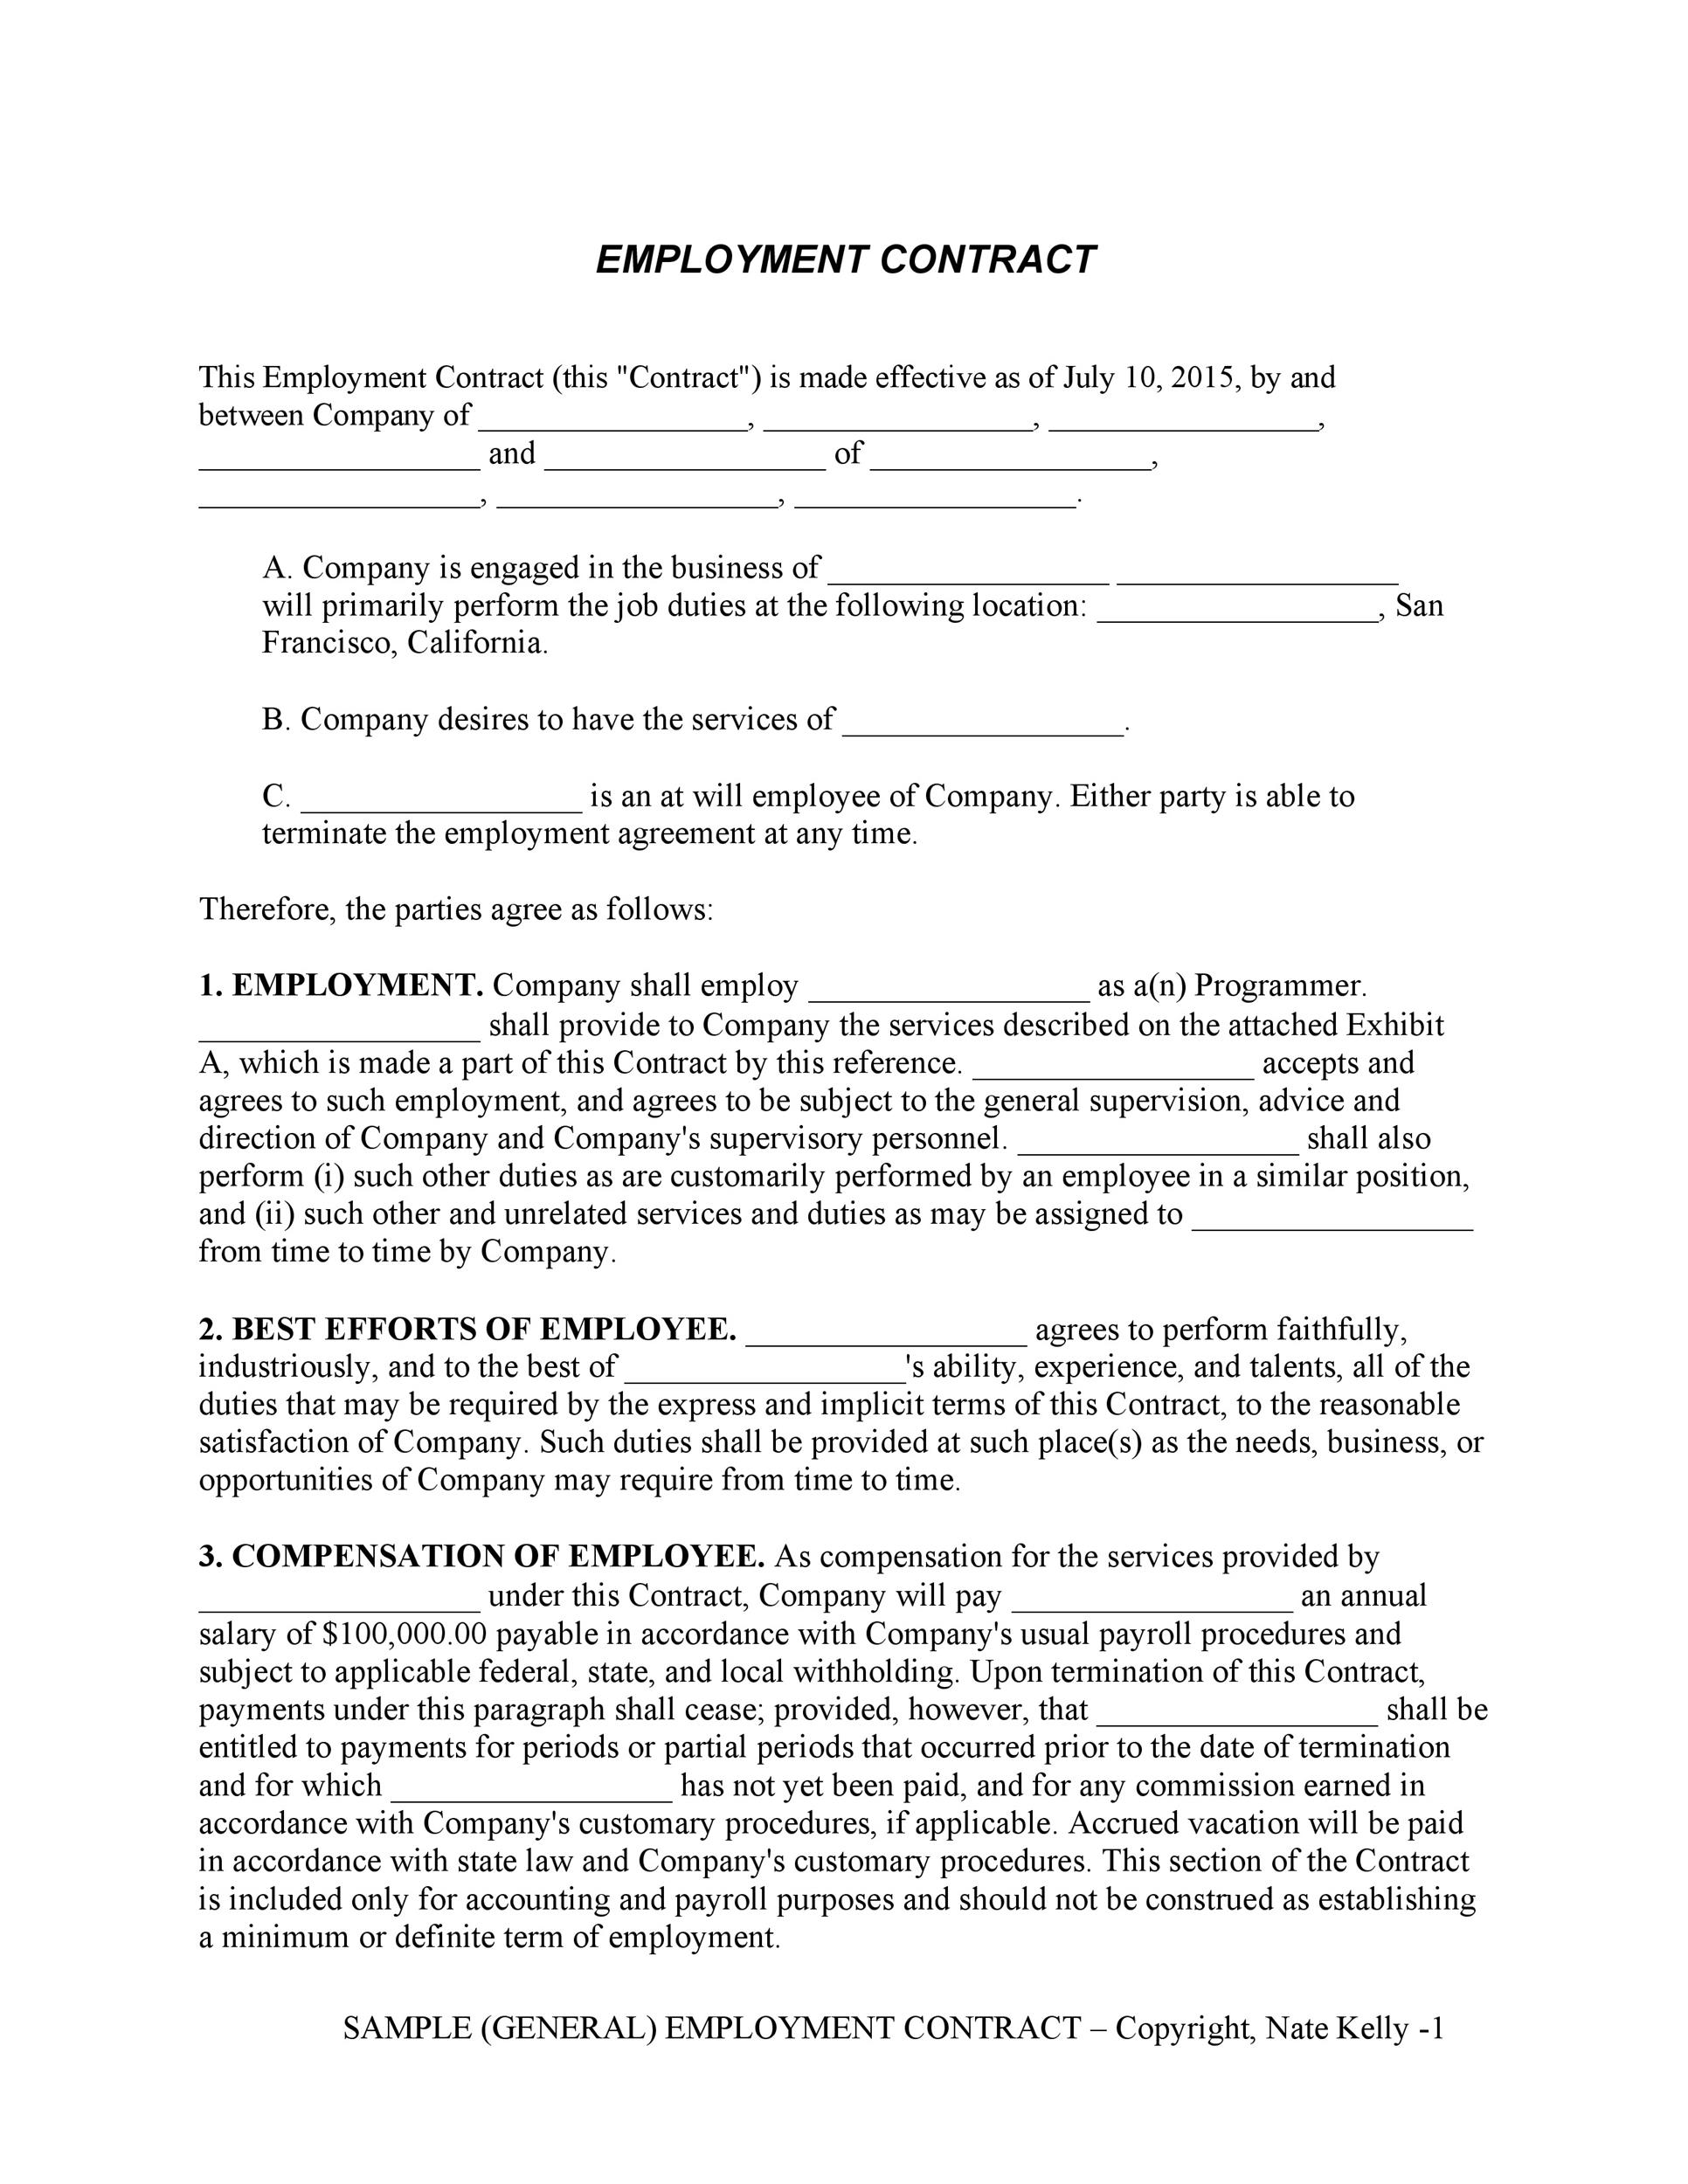 contract work assignments